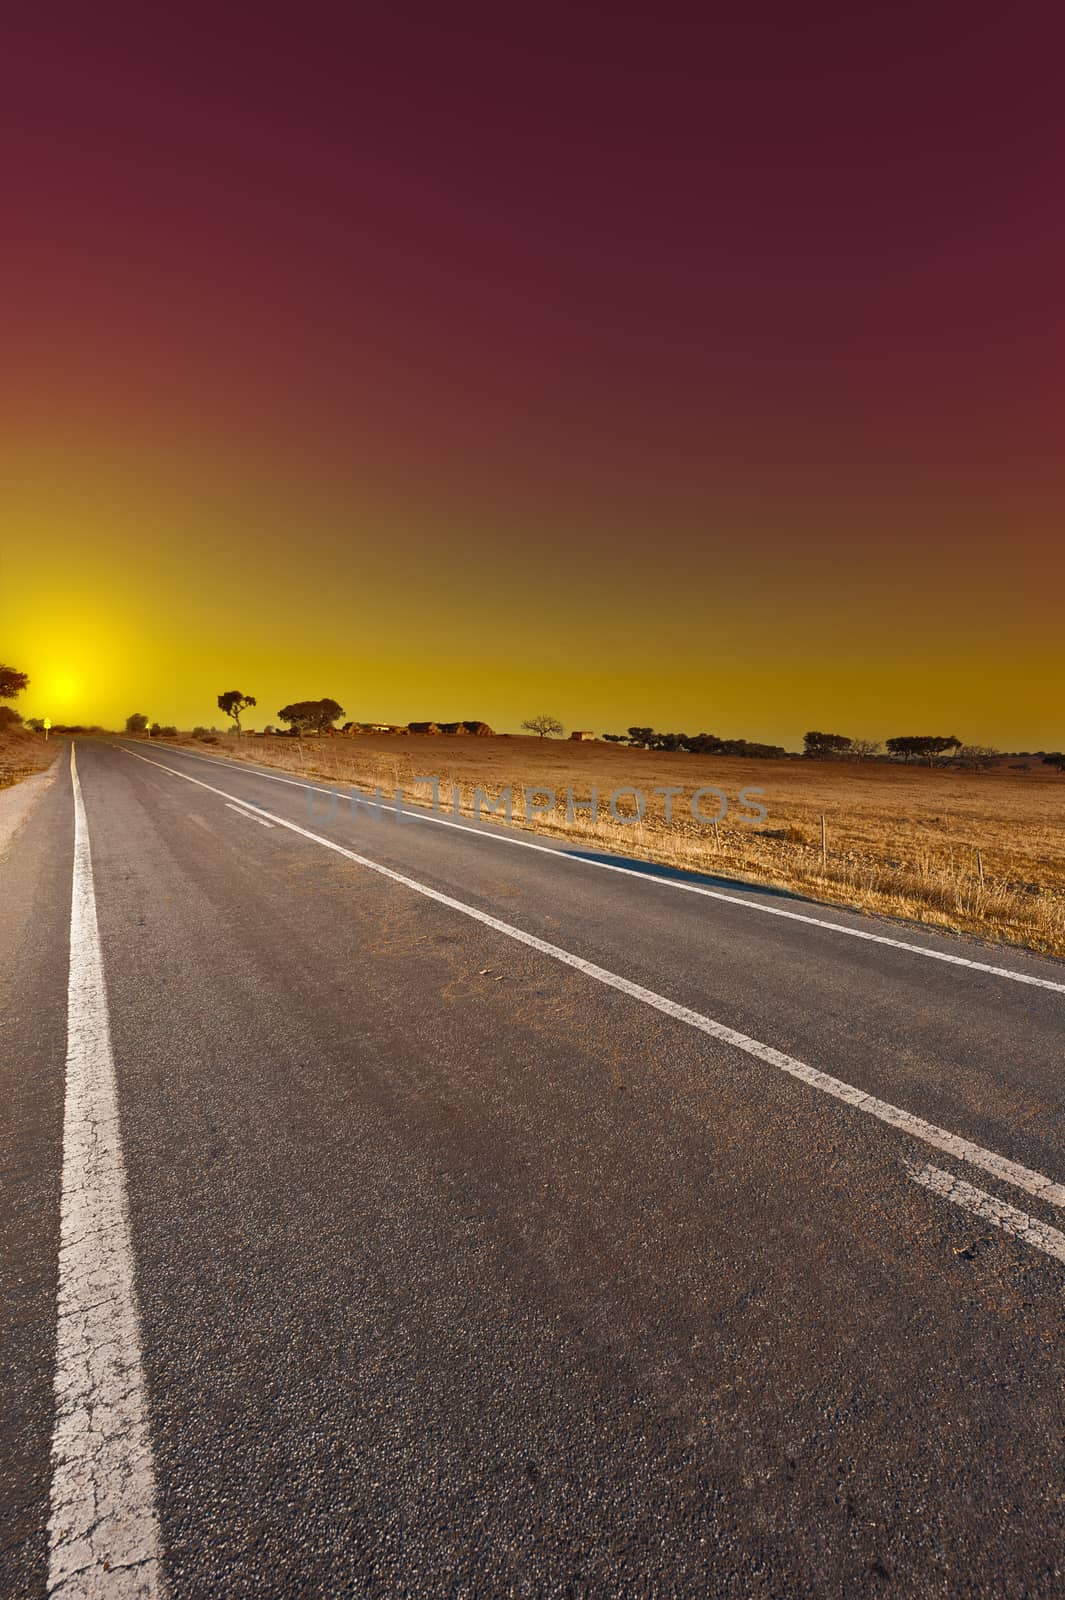 Straigt Asphalt Road  near a Cowshed at Sunset in Portugal